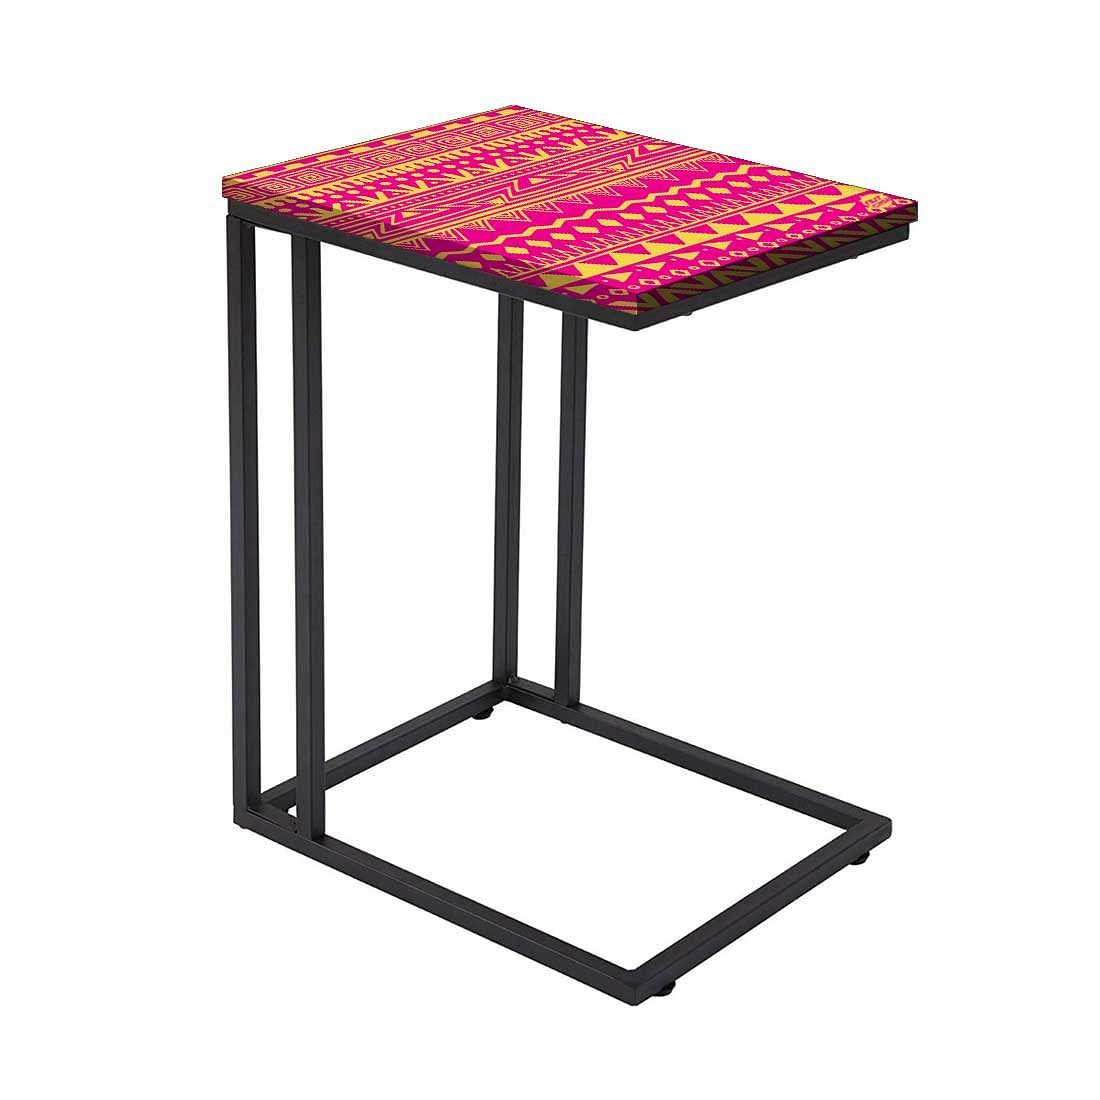 C Shaped End Table For Sofa - Pink Patterns Nutcase